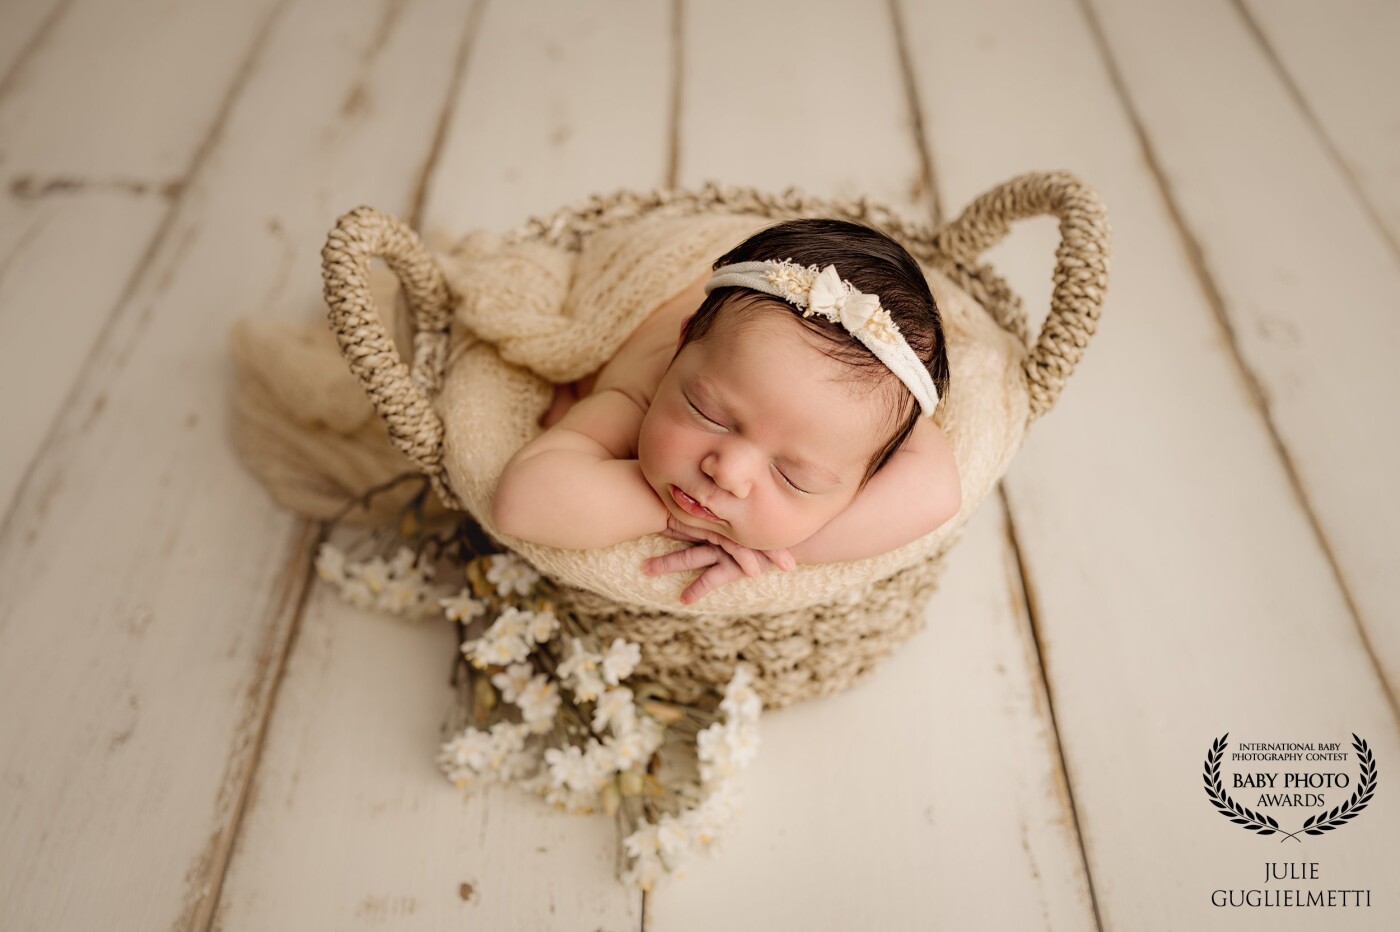 This amazing simple basket is my most requested prop by parents, I really love how versatile it is! This natural boho set-up worked so lovely for this adorable baby girl.